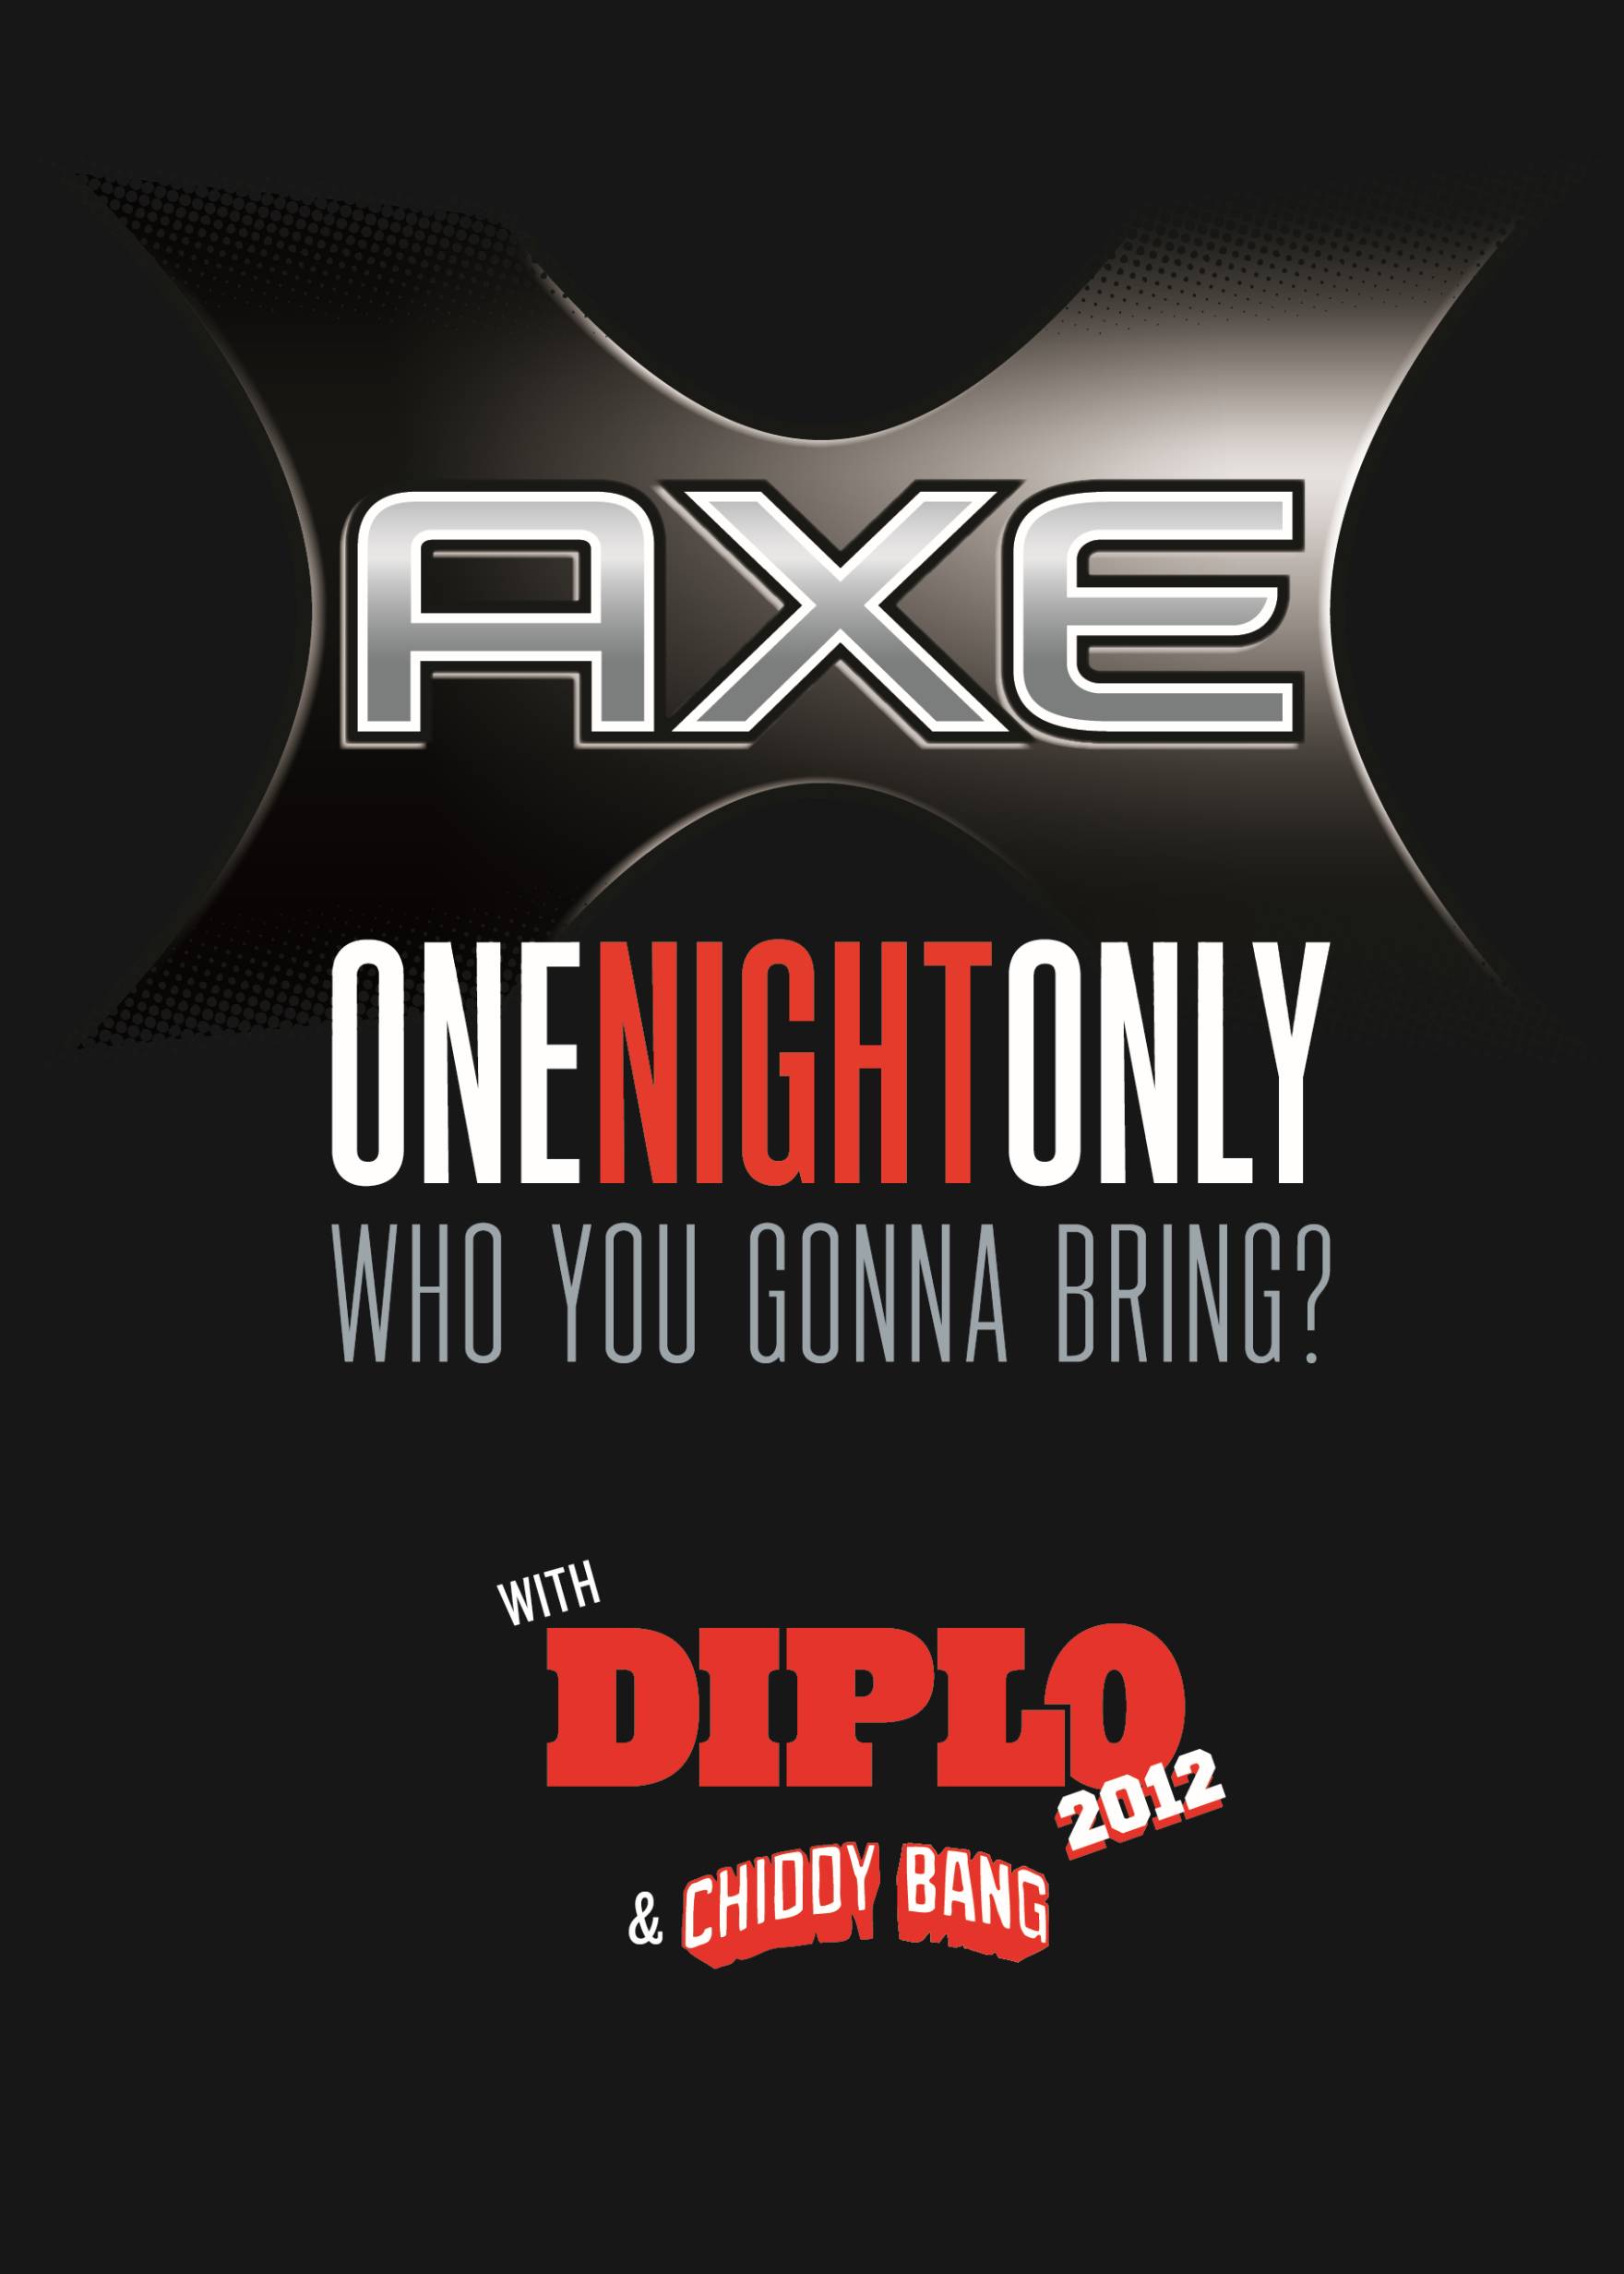 Diplo, Chiddy Bang & AXE One Night Only Tour at Canopy Tomorrow